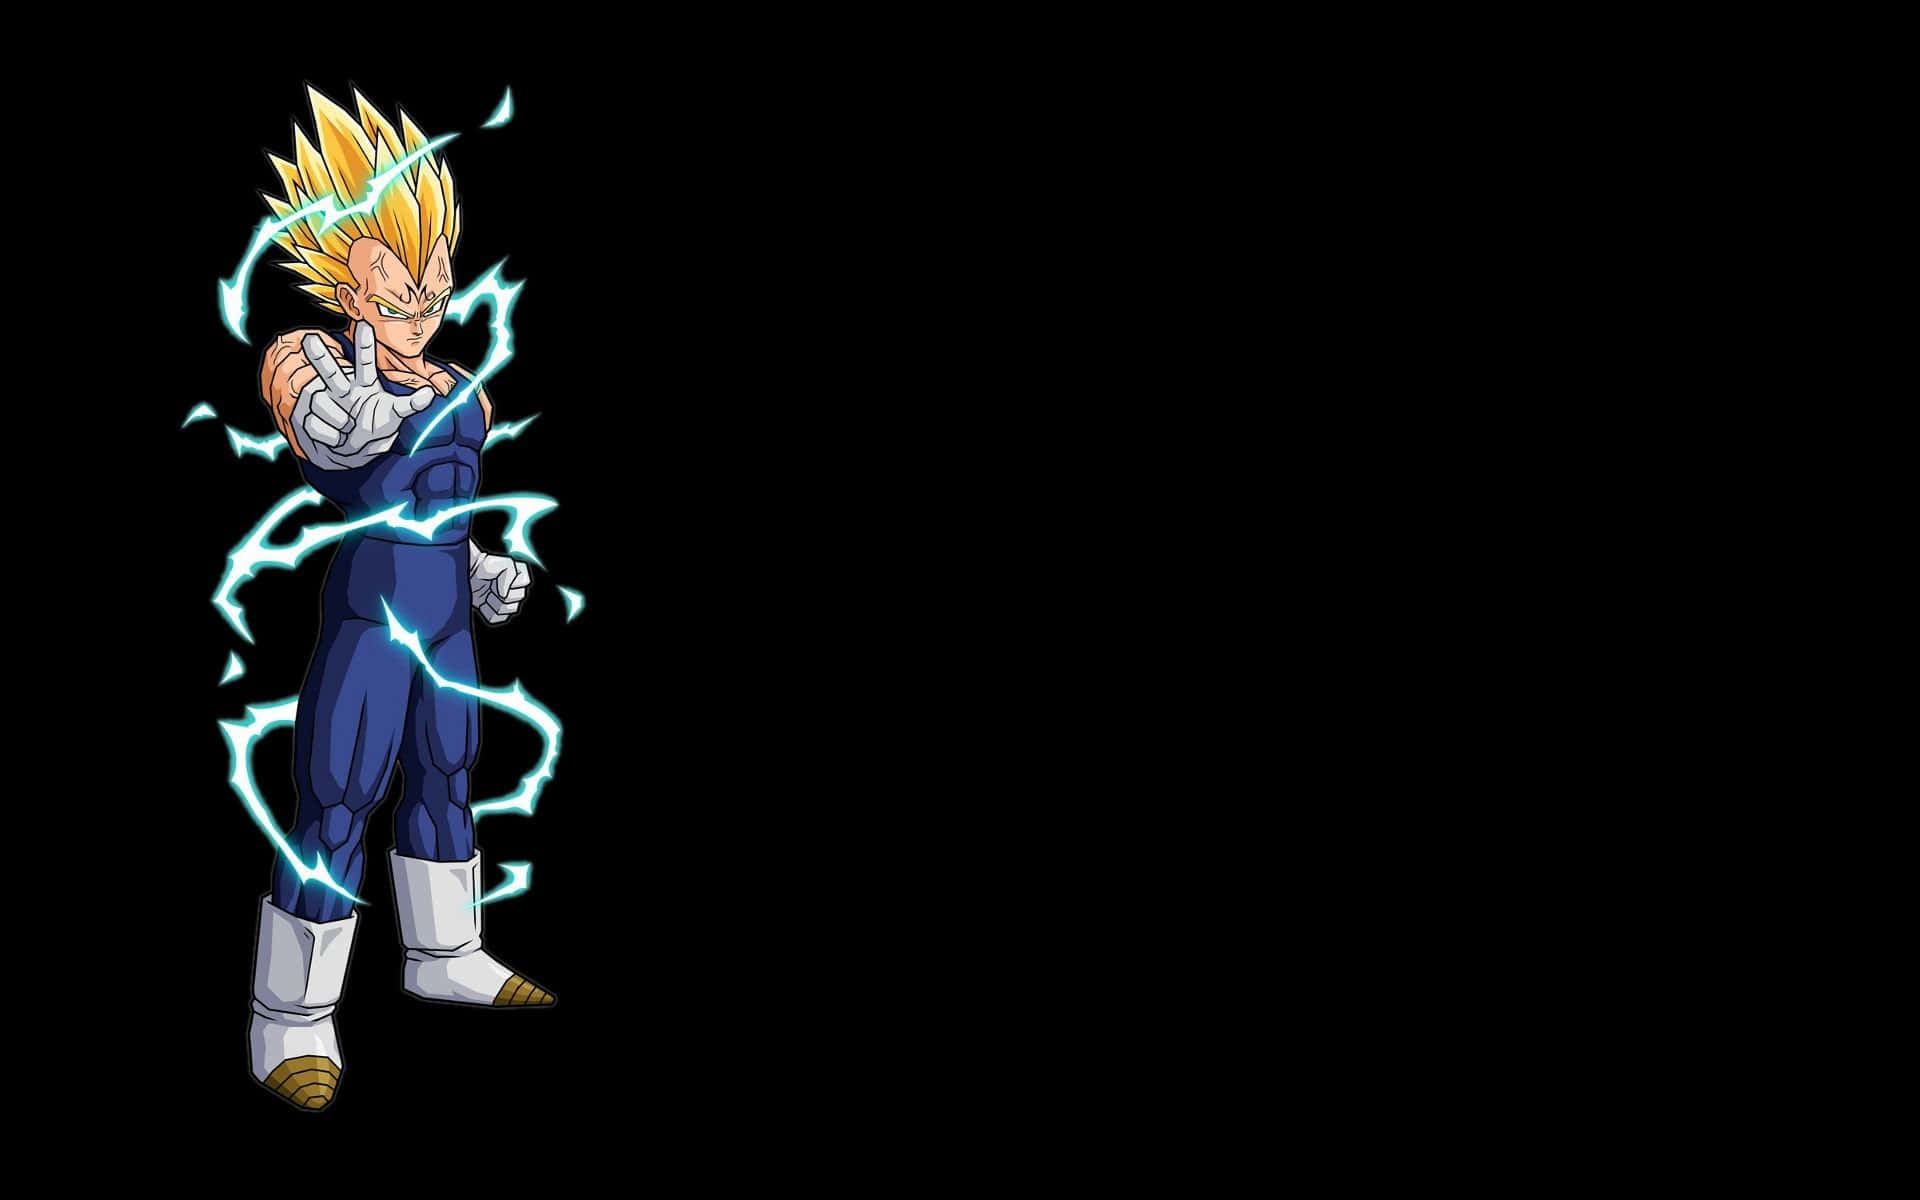 Vegeta unleashes his power in a stunning display of strength and confidence.